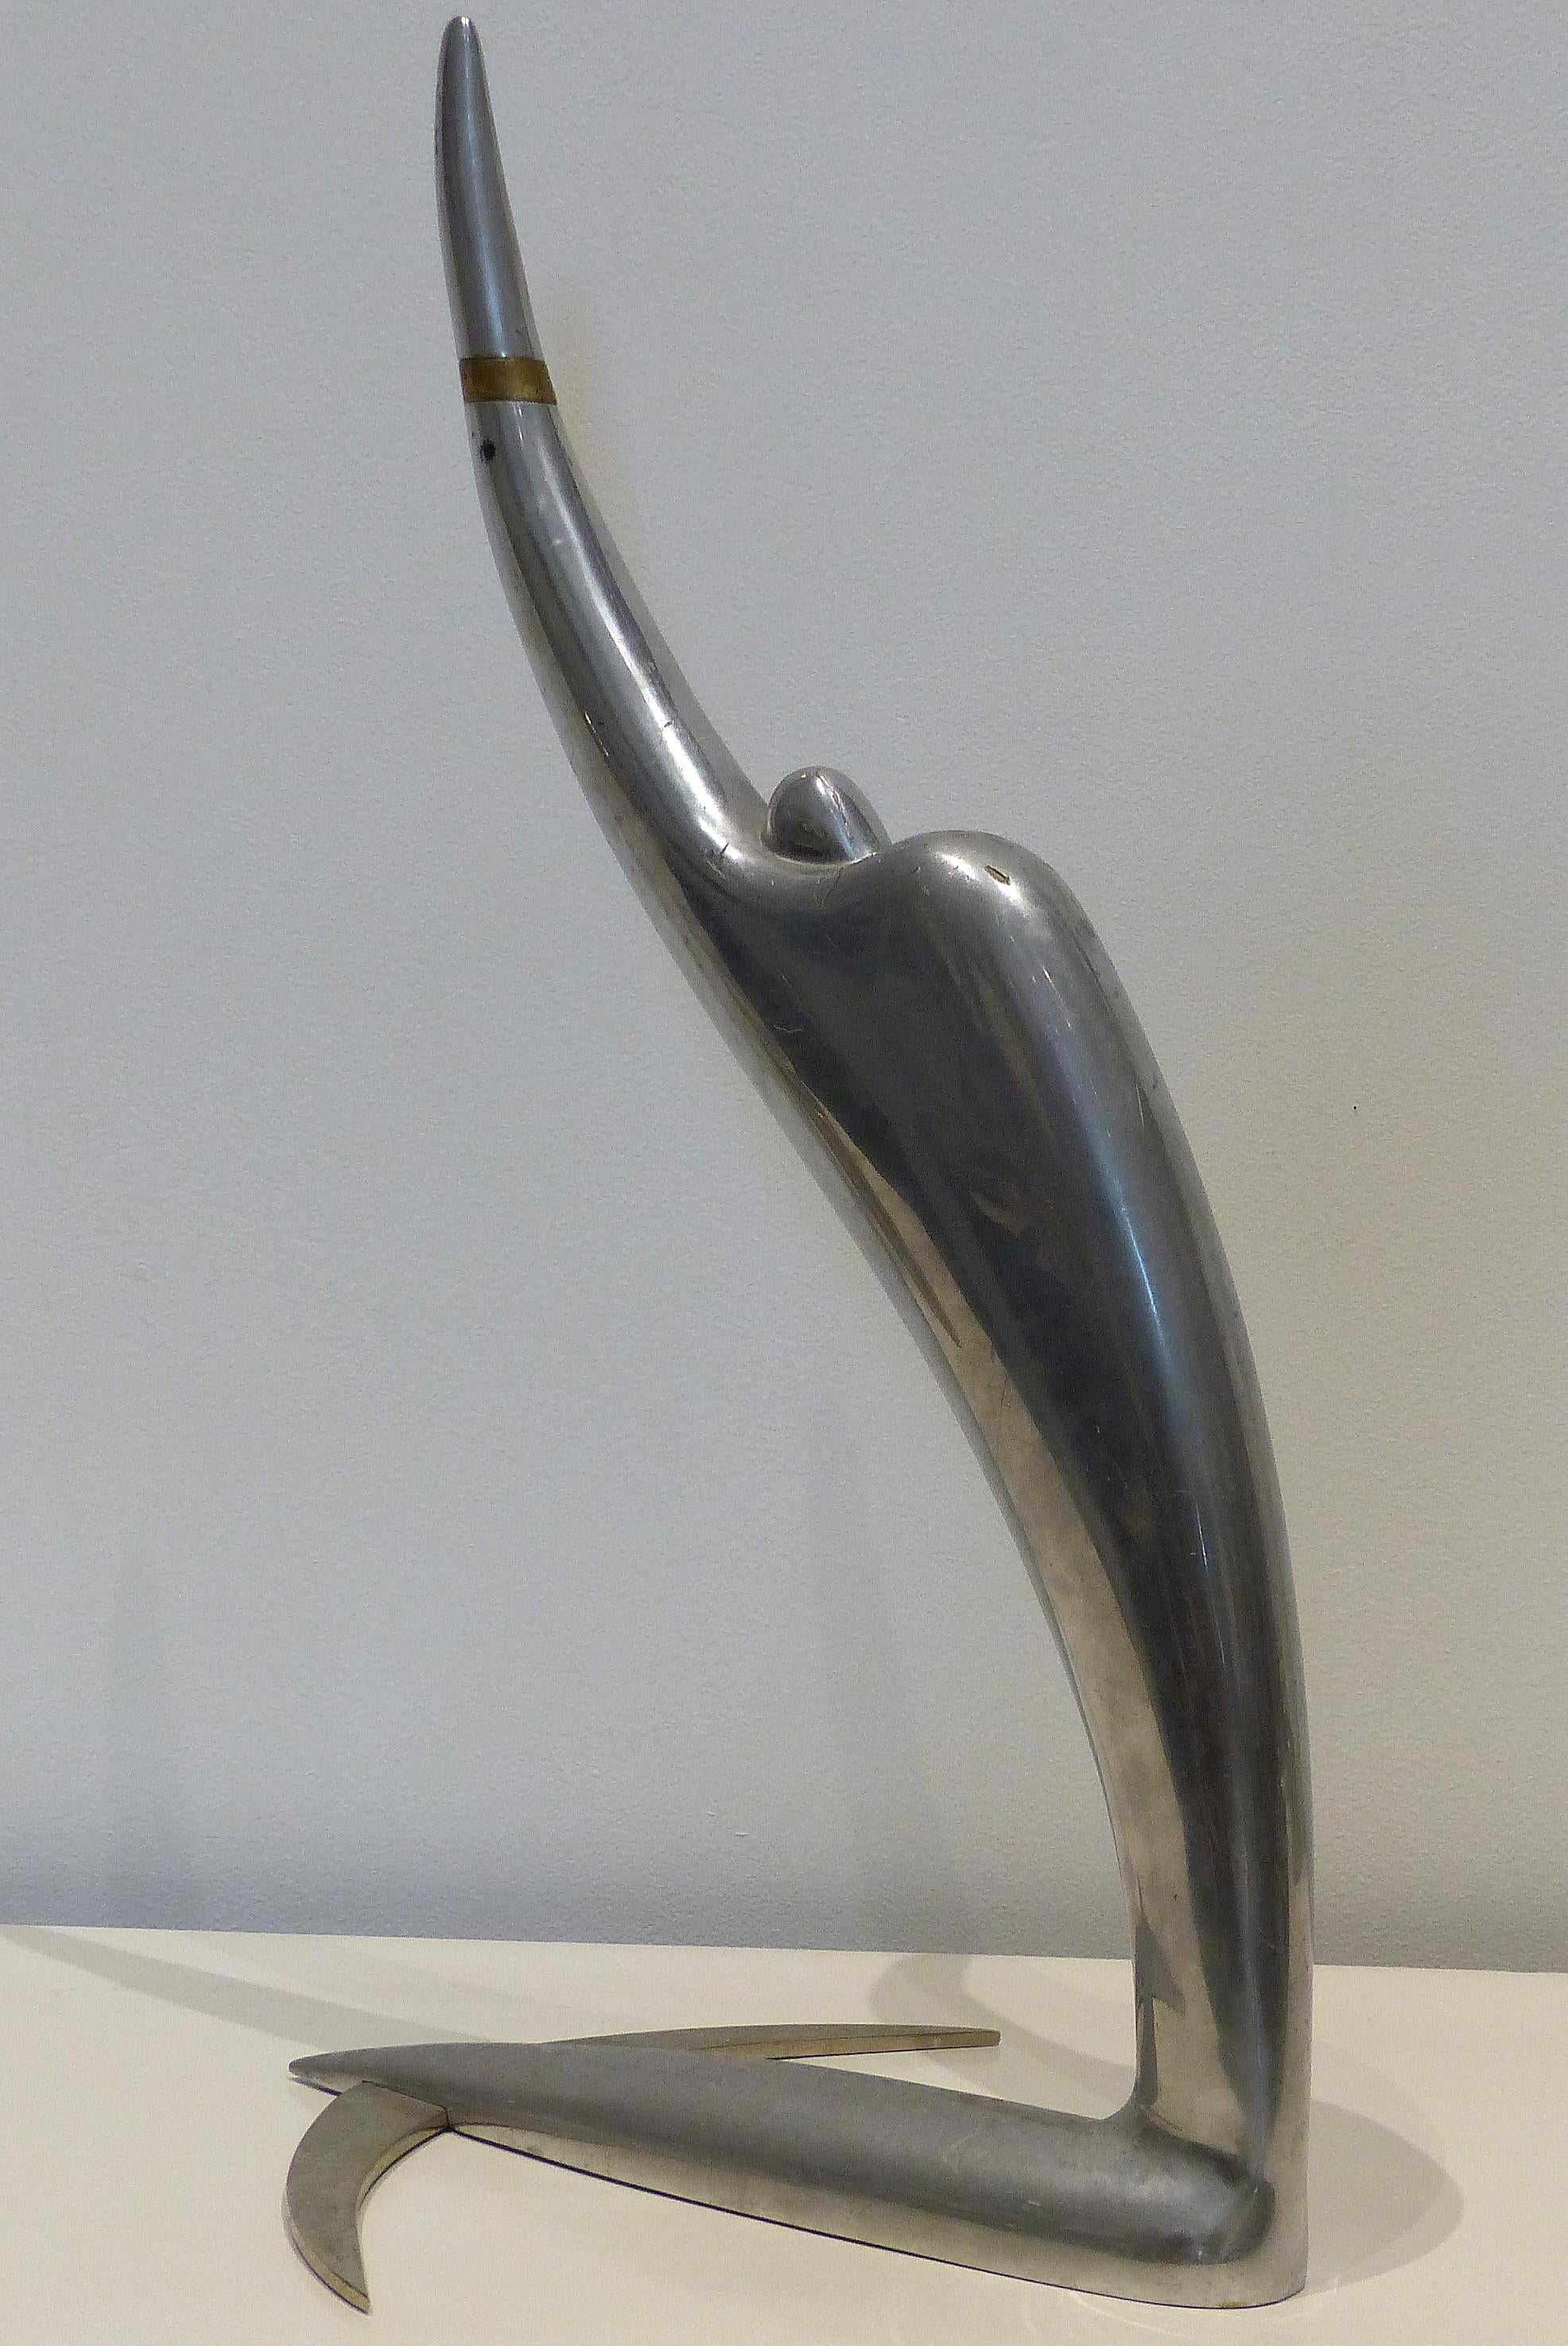 Pierre Cardin, France Rare Signed Abstract Sculpture

Offered for sale is a sinuous 1970s streamline Art Deco style sculpture by Pierre Cardin. The sculpture is made in France and signed 